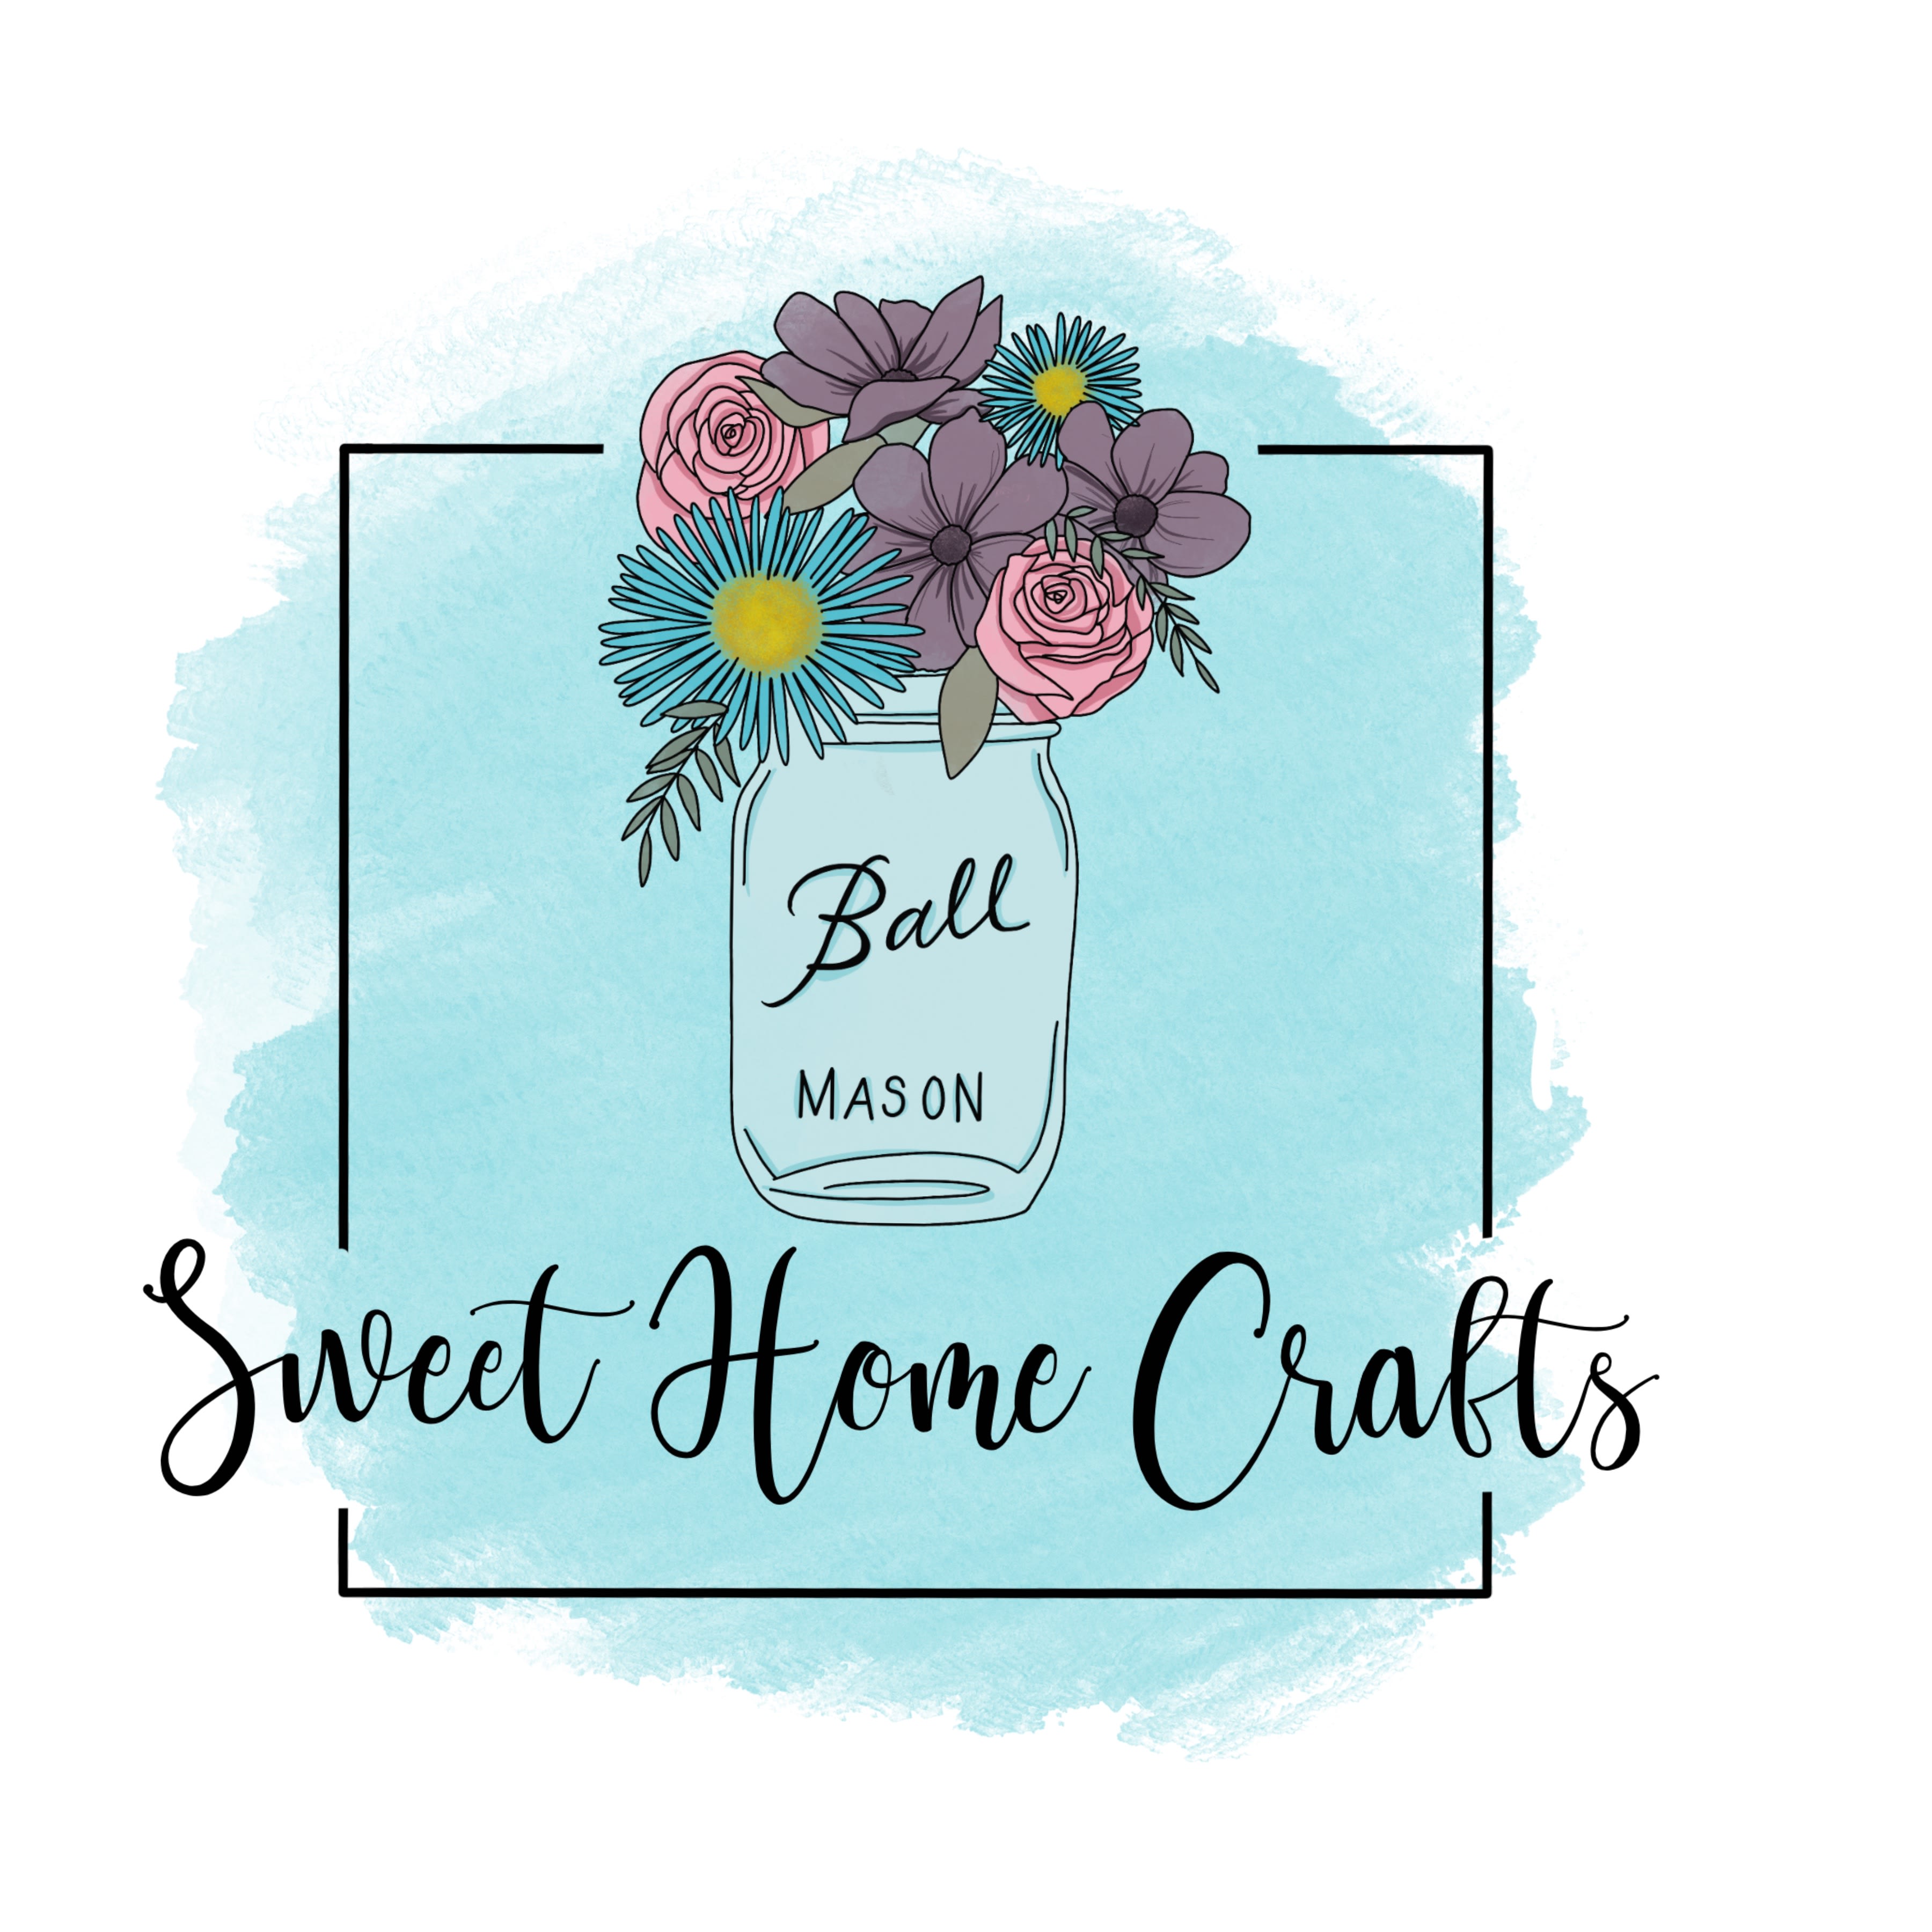 Sweet Home Crafts